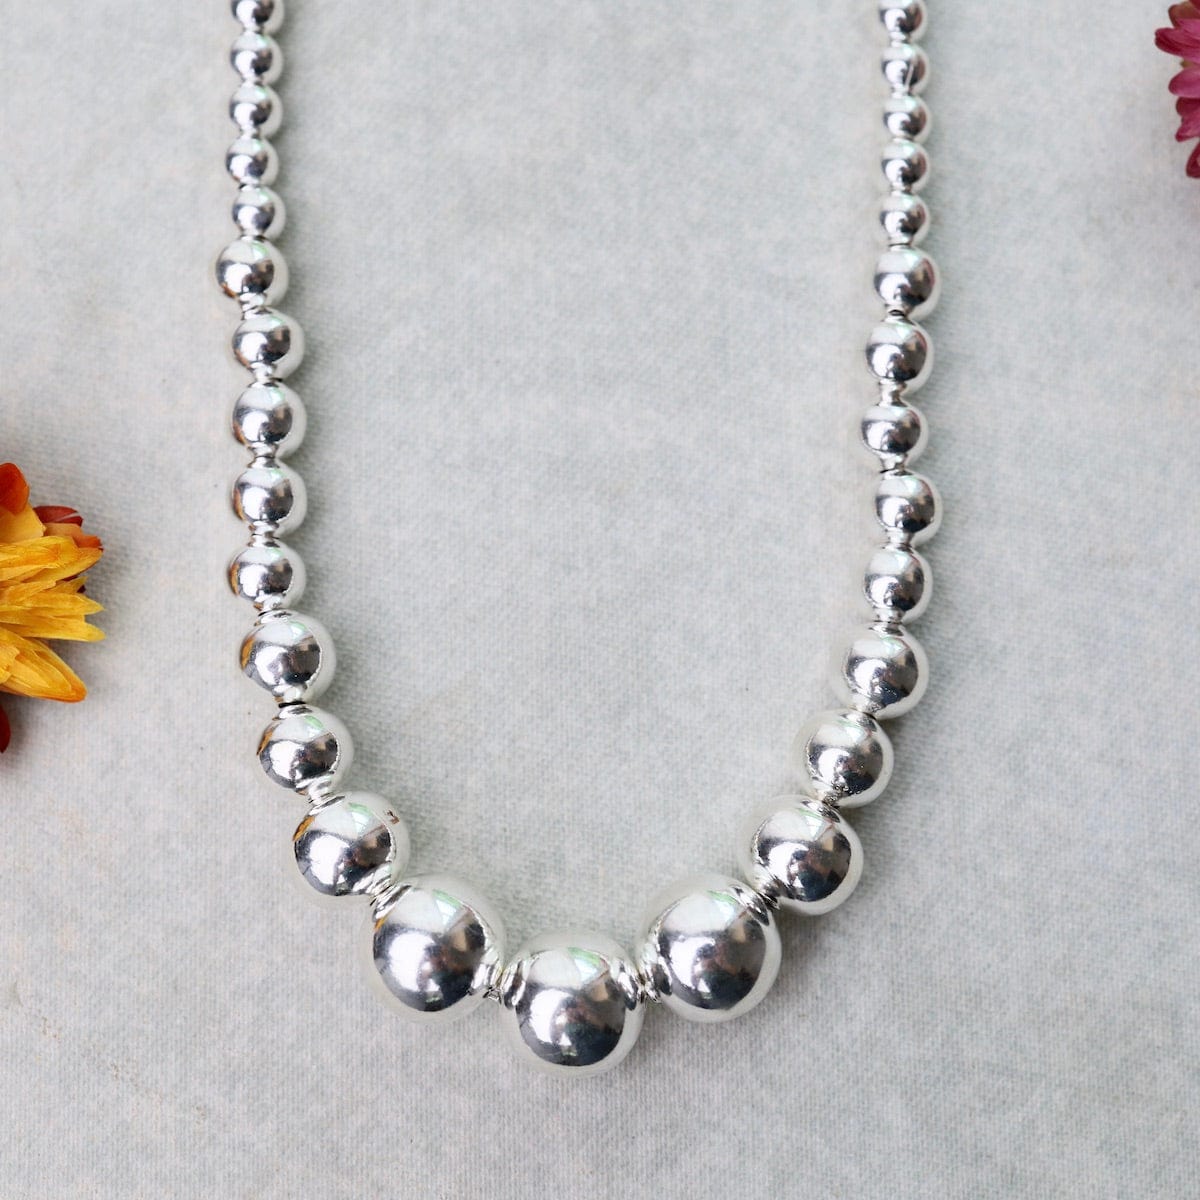 Silver Balls Necklace - Silver Jewellery Sales